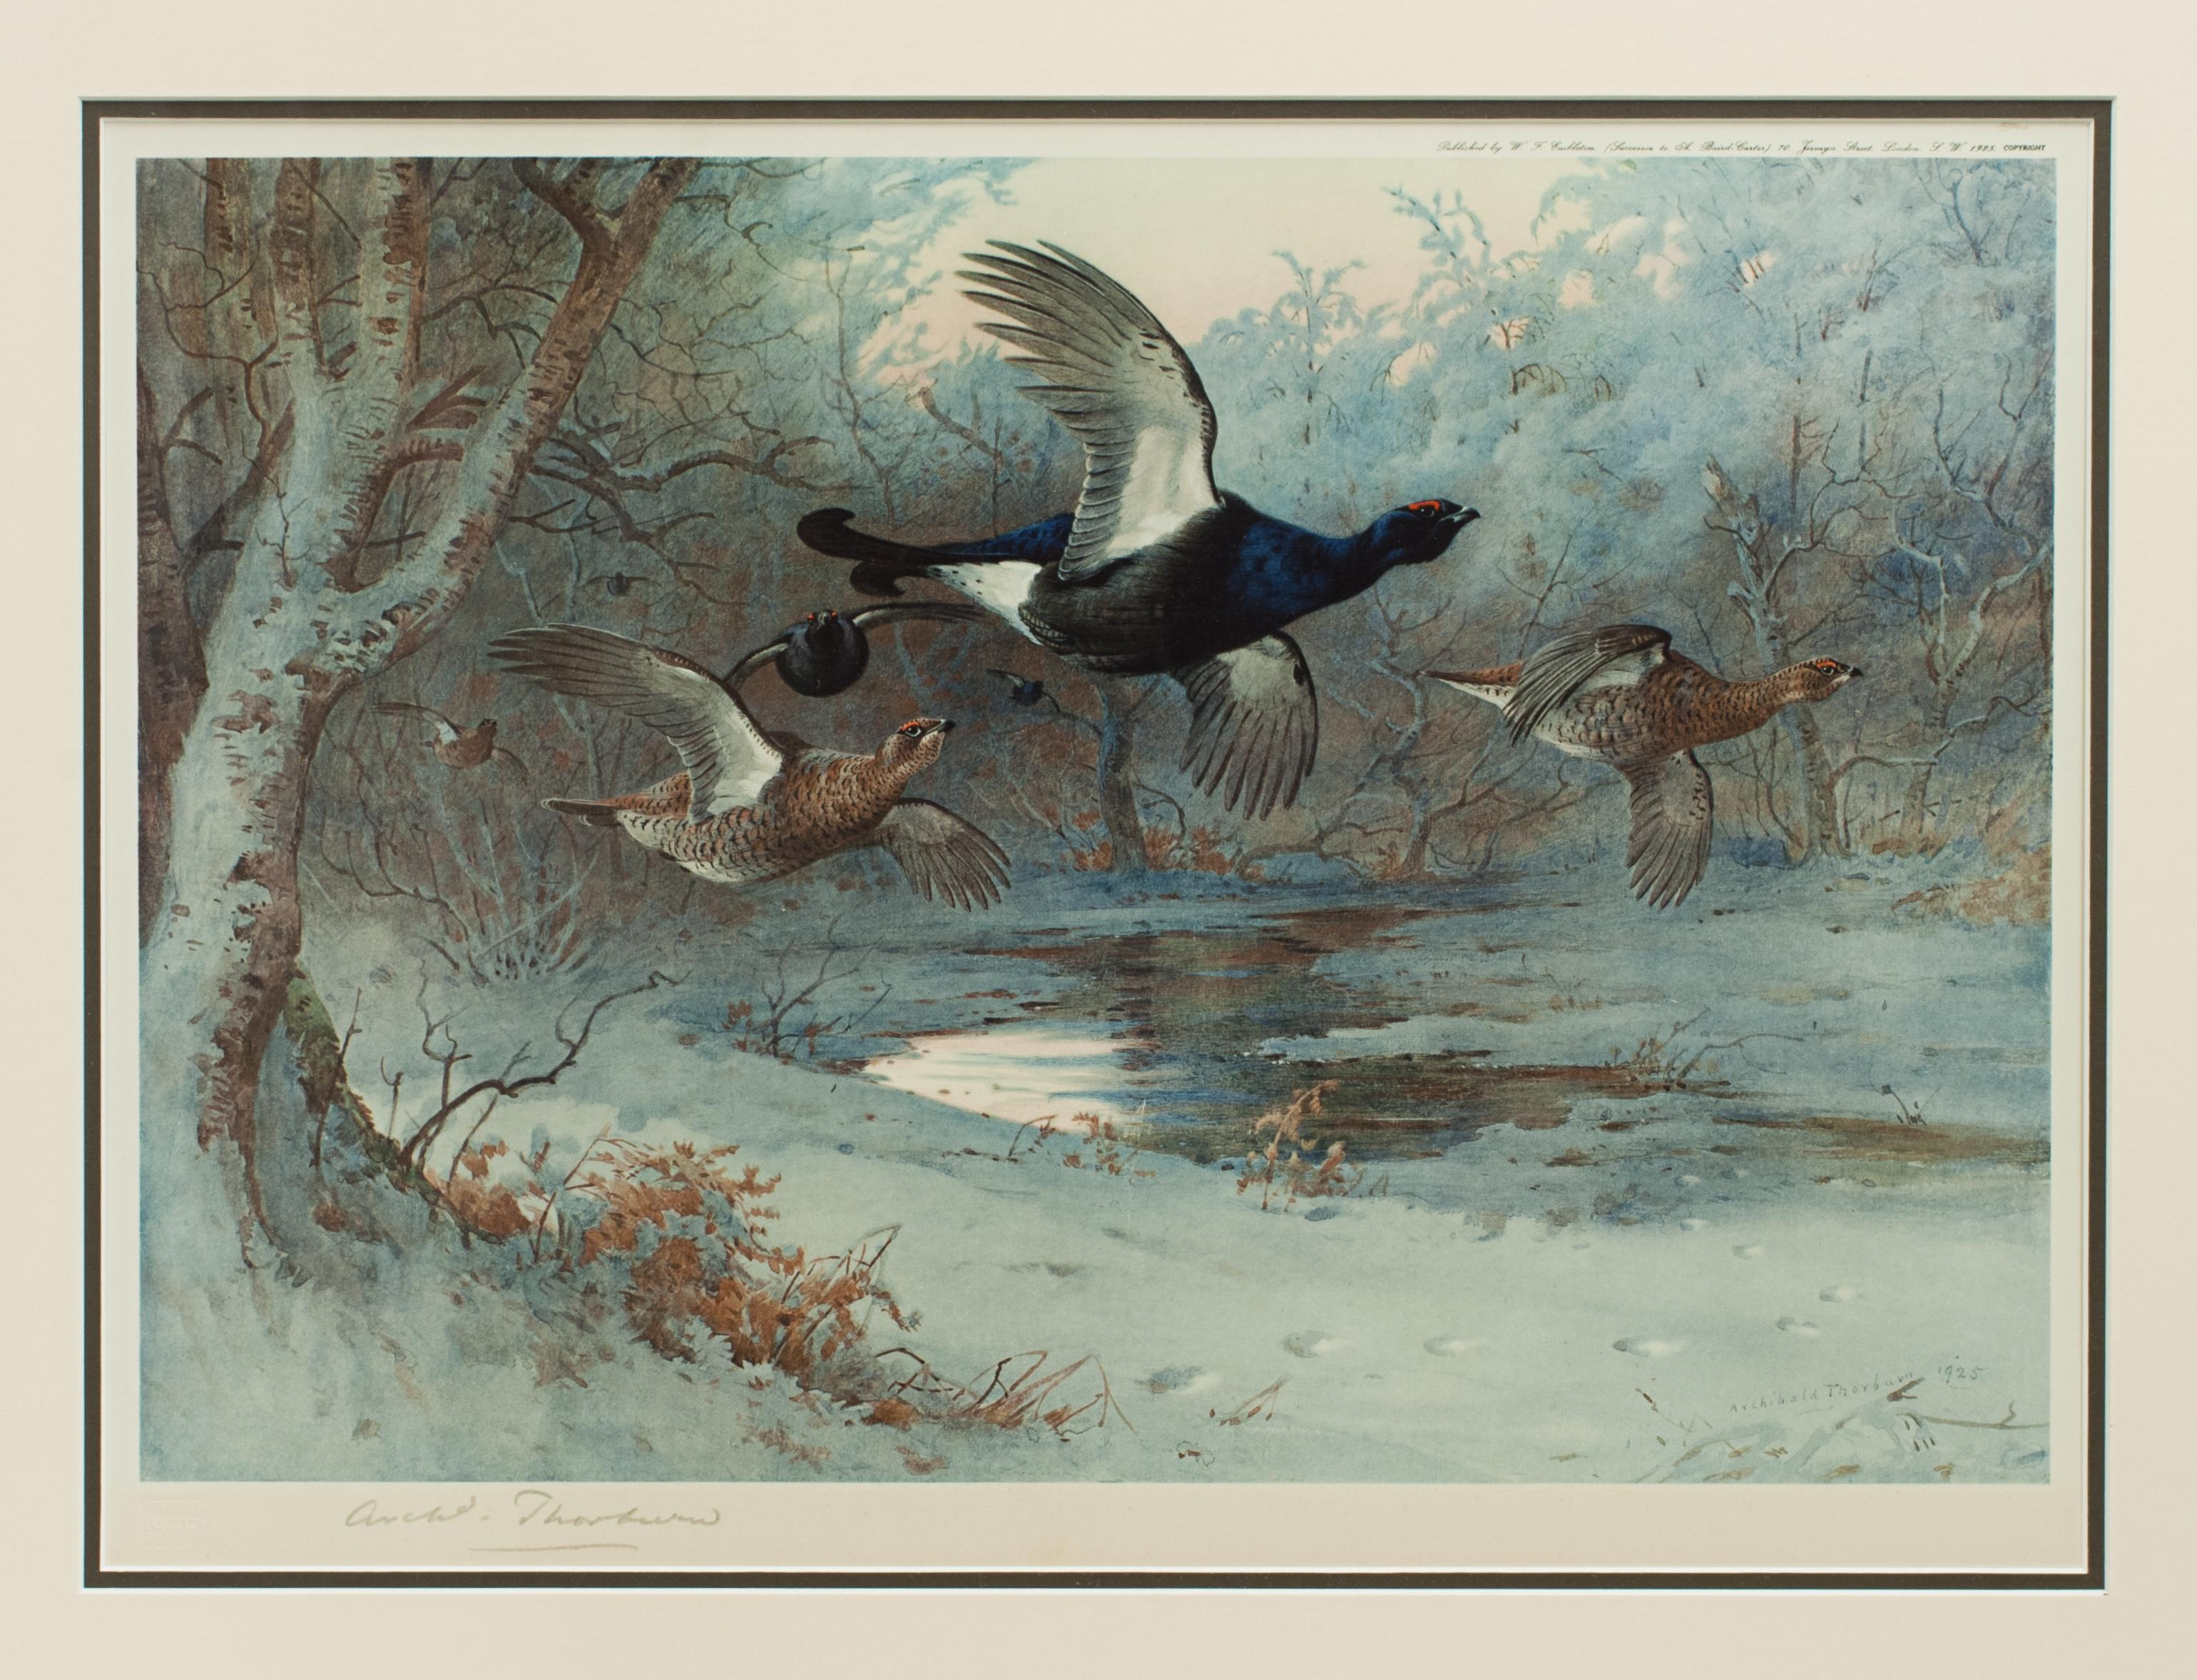 Vintage Game Bird Prints, Colotypes by Archibald Thorburn 'The Seasons' 2